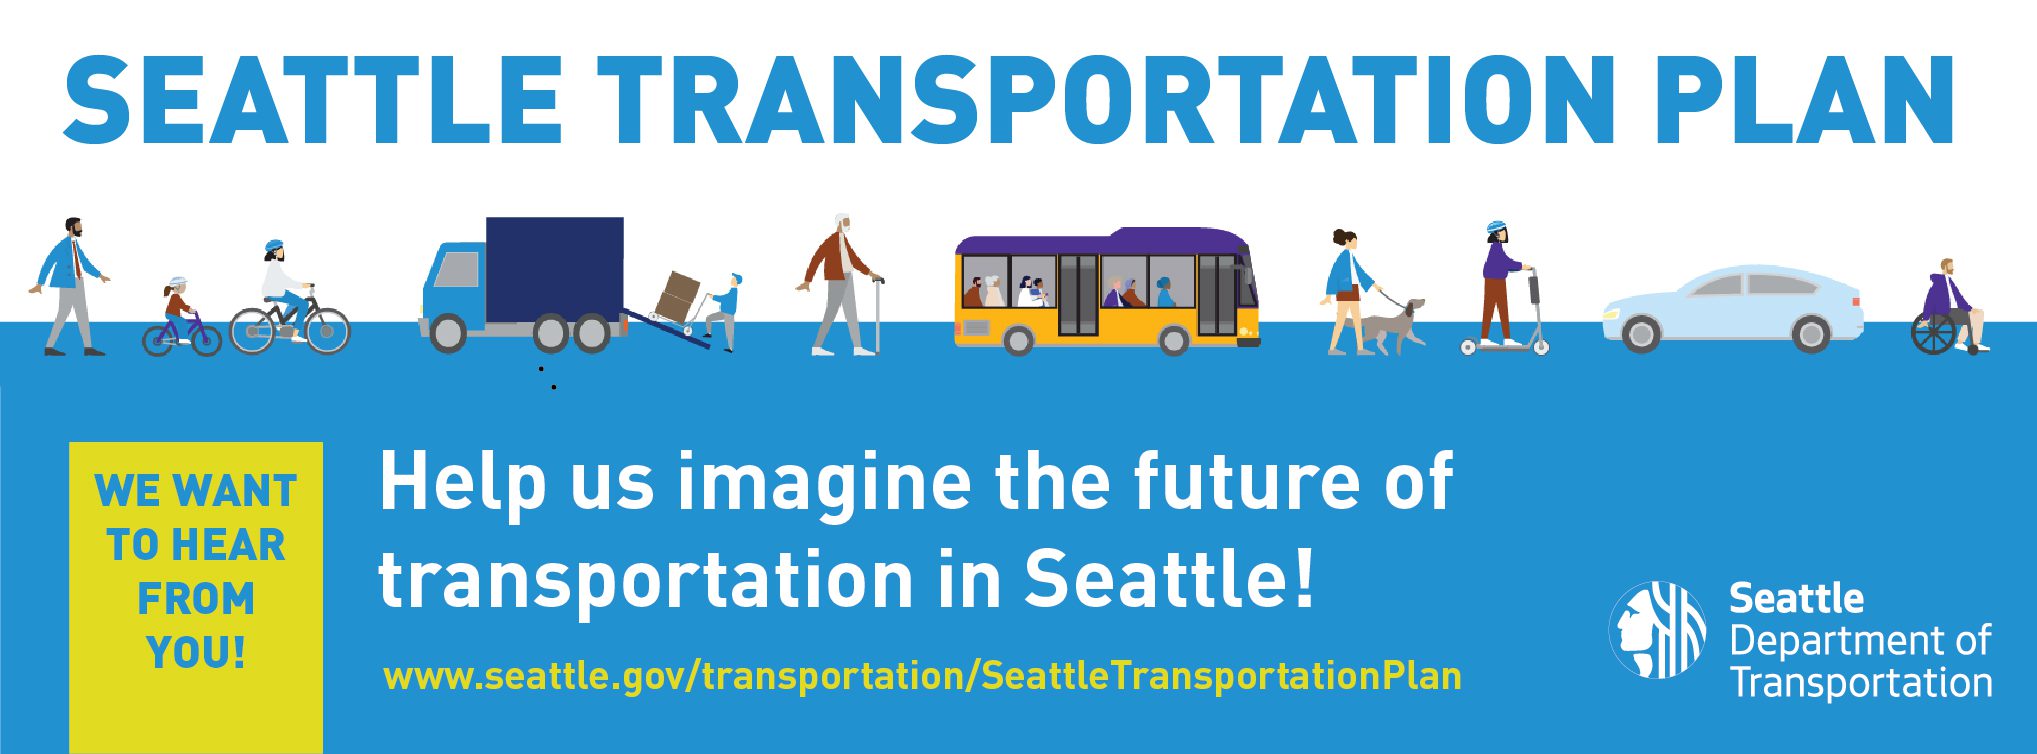 Graphic showing the Seattle Transportation Plan, and encouraging Seattle community members to help SDOT image the future of transportation in Seattle, with a link to a website with more information.